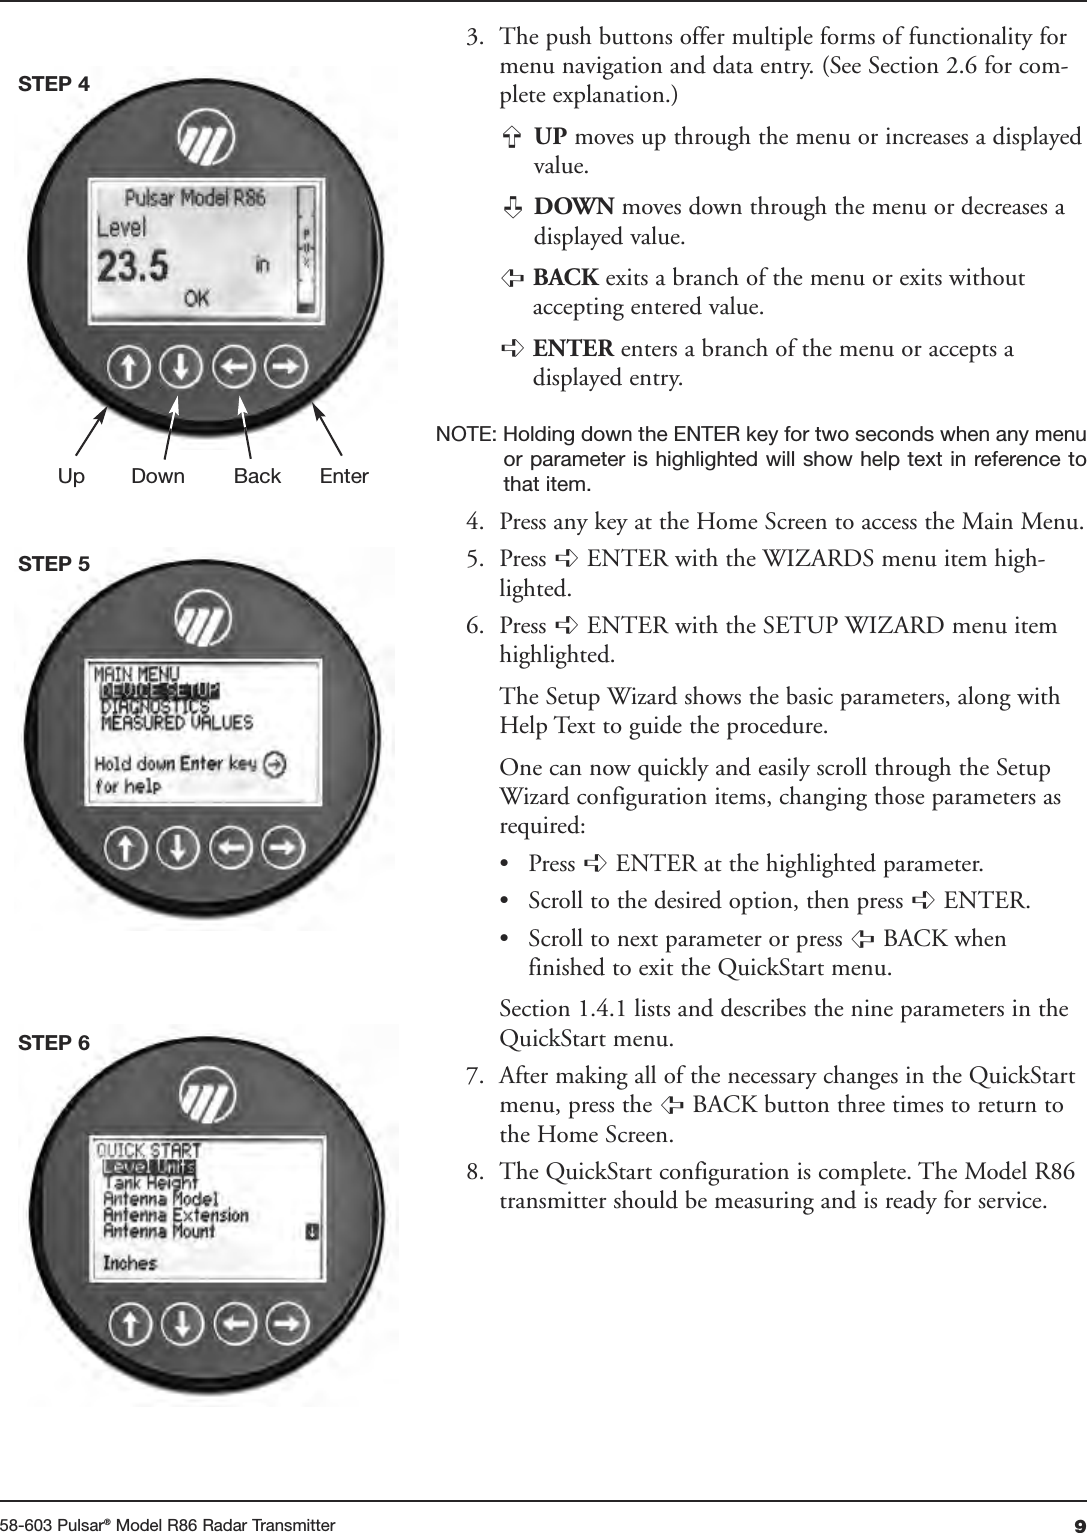 958-603 Pulsar®Model R86 Radar Transmitter3. The push buttons offer multiple forms of functionality formenu navigation and data entry. (See Section 2.6 for com-plete explanation.)UP moves up through the menu or increases a displayedvalue.DOWN moves down through the menu or decreases adisplayed value.BACK exits a branch of the menu or exits withoutaccepting entered value.ENTER enters a branch of the menu or accepts adisplayed entry.NOTE: Holding down the ENTER key for two seconds when any menuor parameter is highlighted will show help text in reference tothat item.4. Press any key at the Home Screen to access the Main Menu.5. Press  ENTER with the WIZARDS menu item high-lighted.6. Press  ENTER with the SETUP WIZARD menu itemhighlighted.The Setup Wizard shows the basic parameters, along withHelp Text to guide the procedure.One can now quickly and easily scroll through the SetupWizard configuration items, changing those parameters asrequired:• Press  ENTER at the highlighted parameter.• Scroll to the desired option, then press  ENTER.• Scroll to next parameter or press  BACK when finished to exit the QuickStart menu.Section 1.4.1 lists and describes the nine parameters in theQuickStart menu.7. After making all of the necessary changes in the QuickStartmenu, press the  BACK button three    times to return tothe Home Screen.8. The QuickStart configuration is complete. The Model R86transmitter should be measuring and is ready for service.➪➪➪➪➪➪➪➪➪➪Up Down Back EnterSTEP 4STEP 5STEP 6